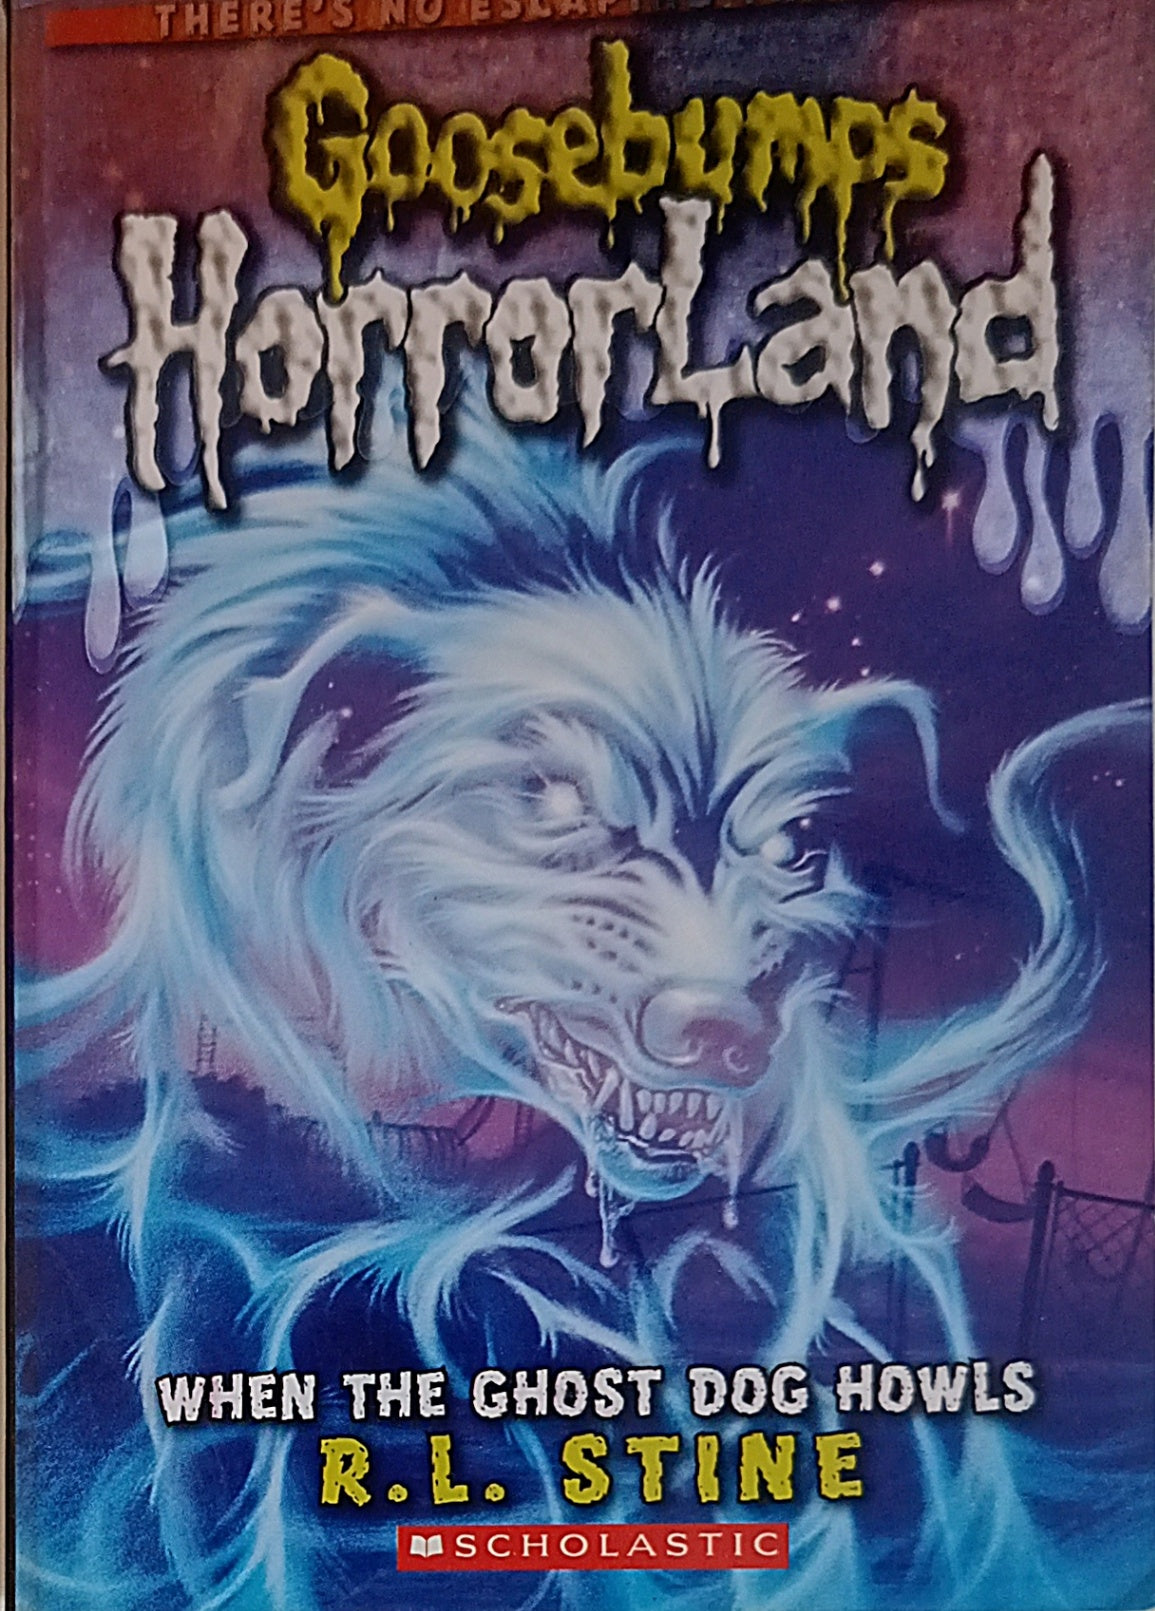 Goosebumps Horror Land When the Ghost Dog Howls